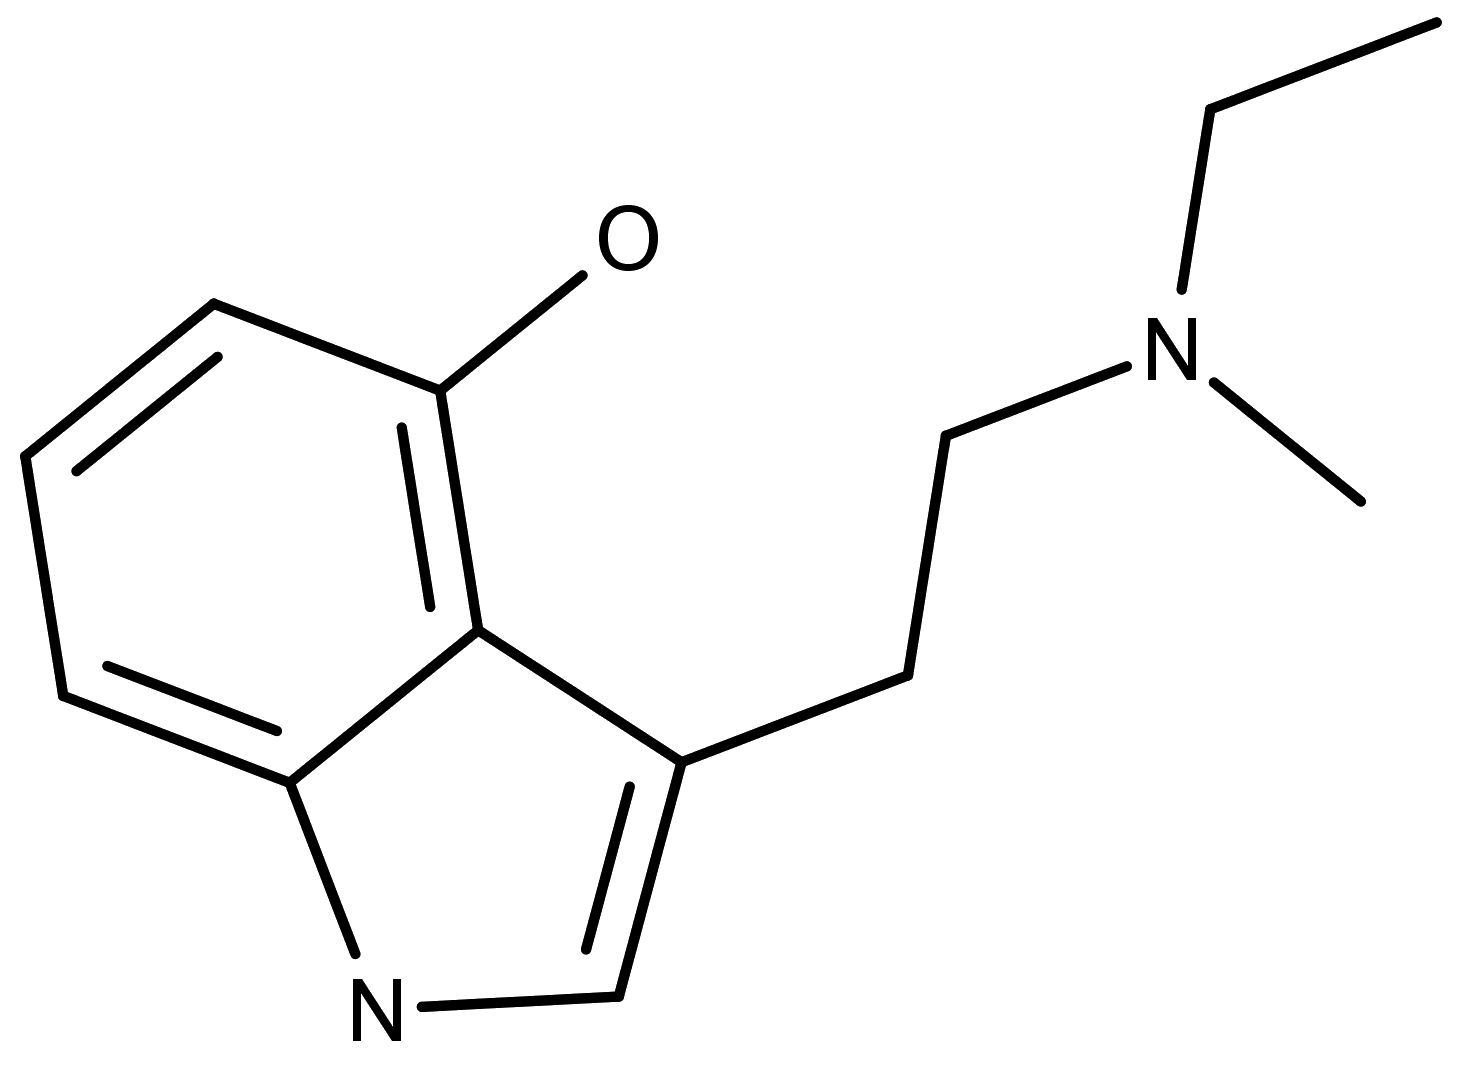 Chemical structure of 4HO-MET